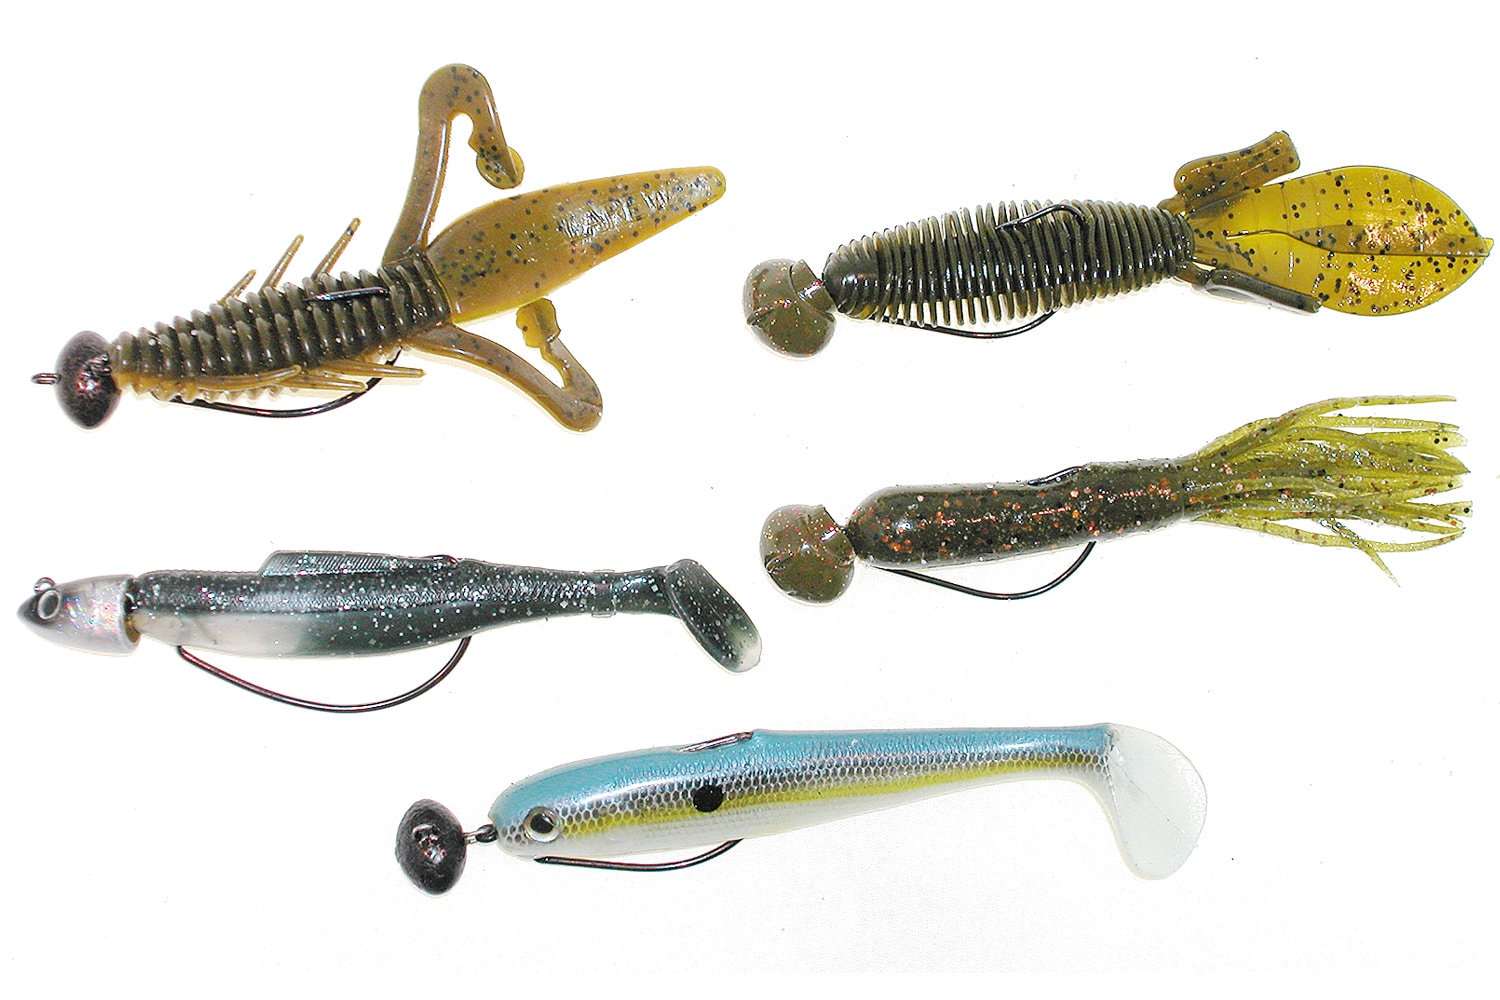 2 Favorite Weedless Lures for Deep Summertime…